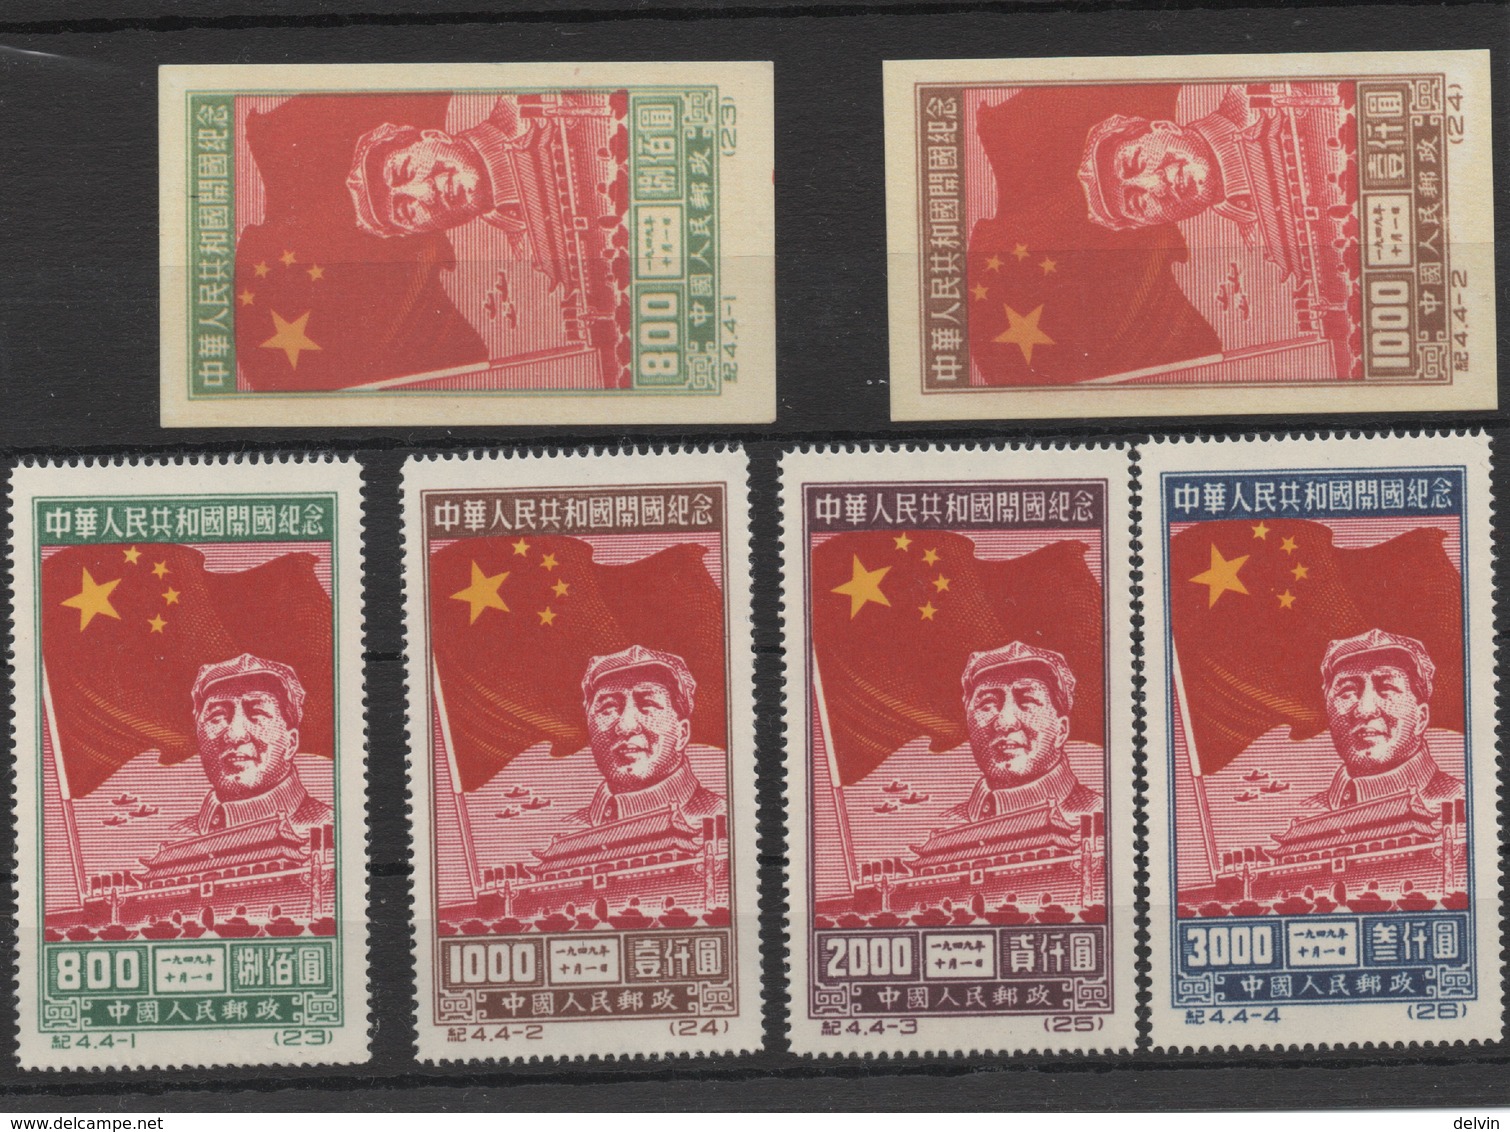 China - 1950 Mao Tze Tung And Flag Complete Set Of 6 Stamps Perf.& Imperf. Reprint Of The Era. New No Gum (see Photo) - Official Reprints